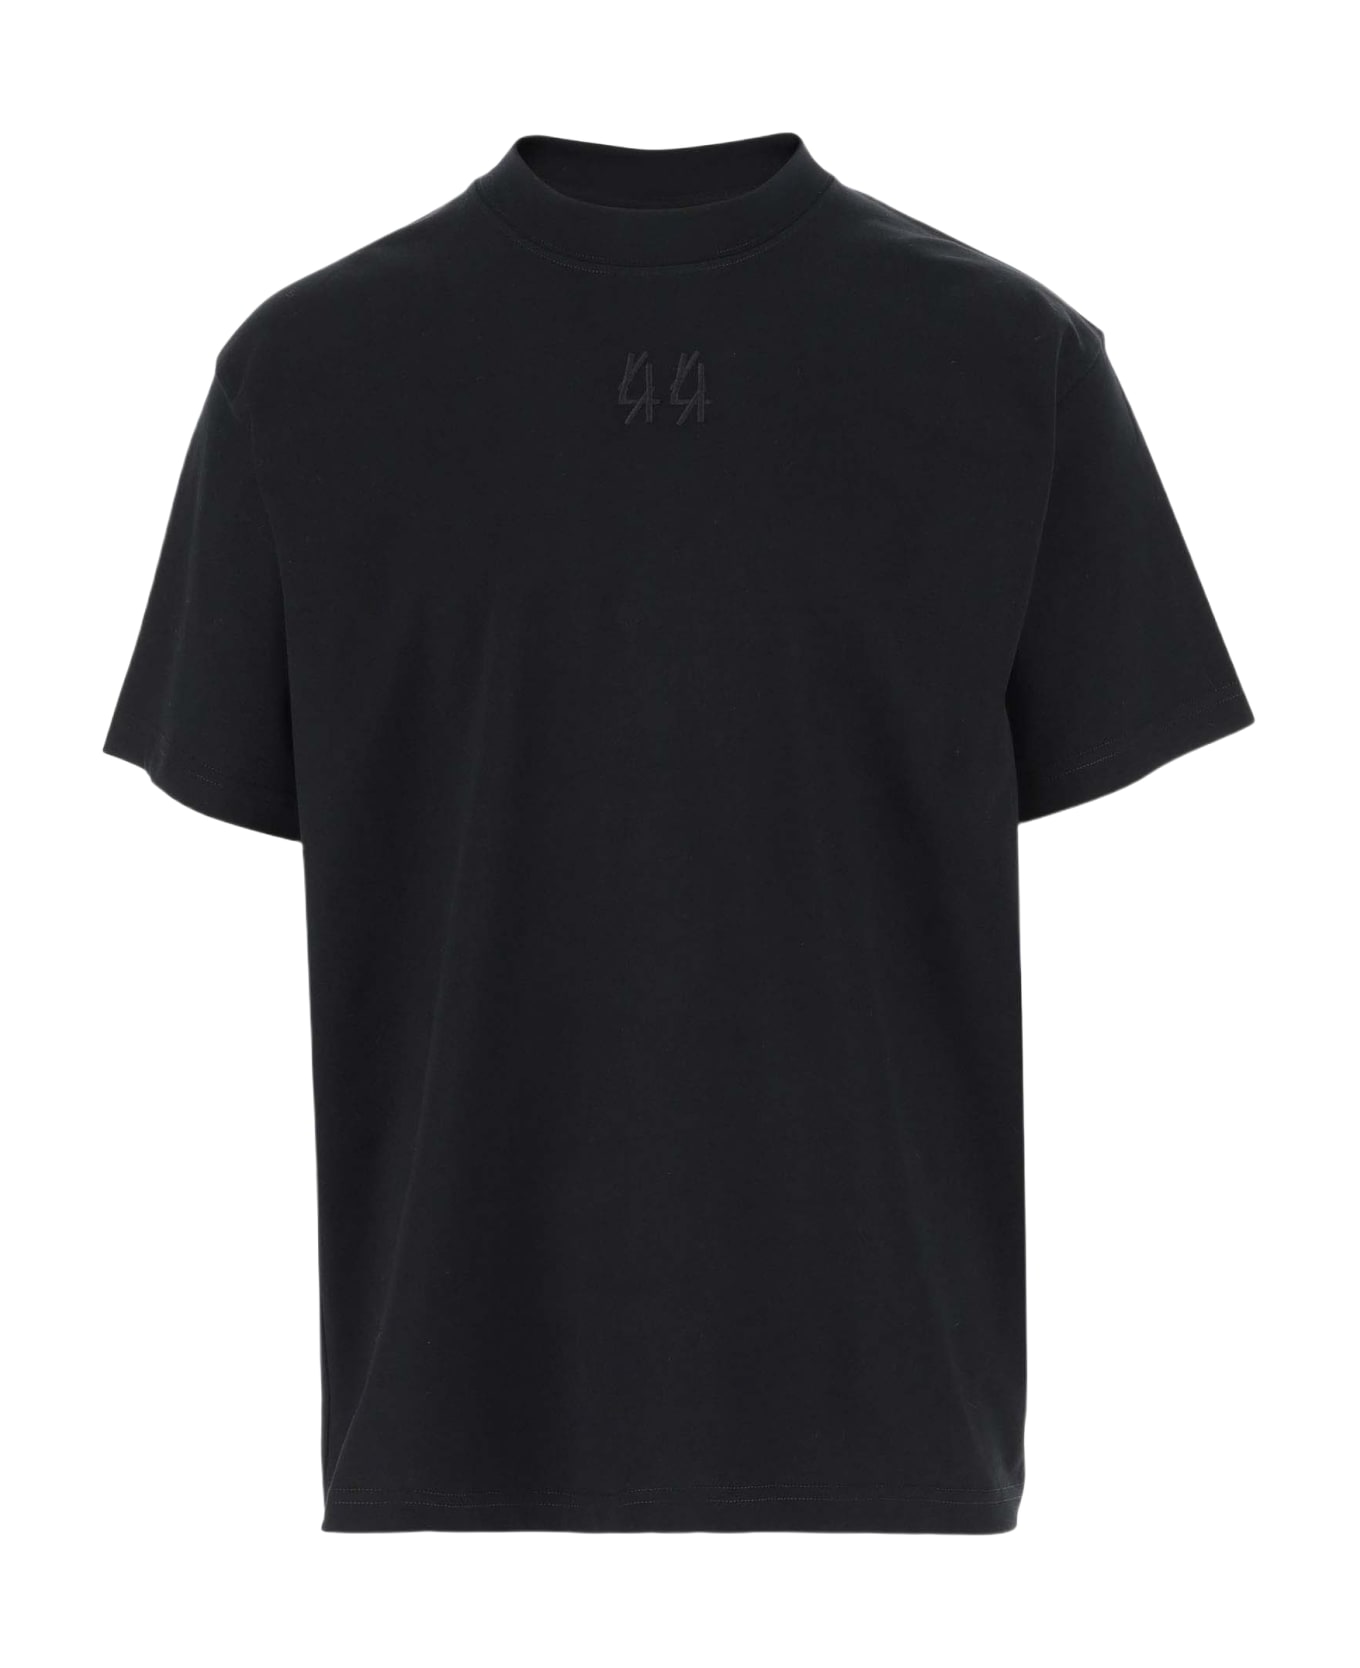 44 Label Group Cotton T-shirt With Logo T-Shirt - BLACK シャツ